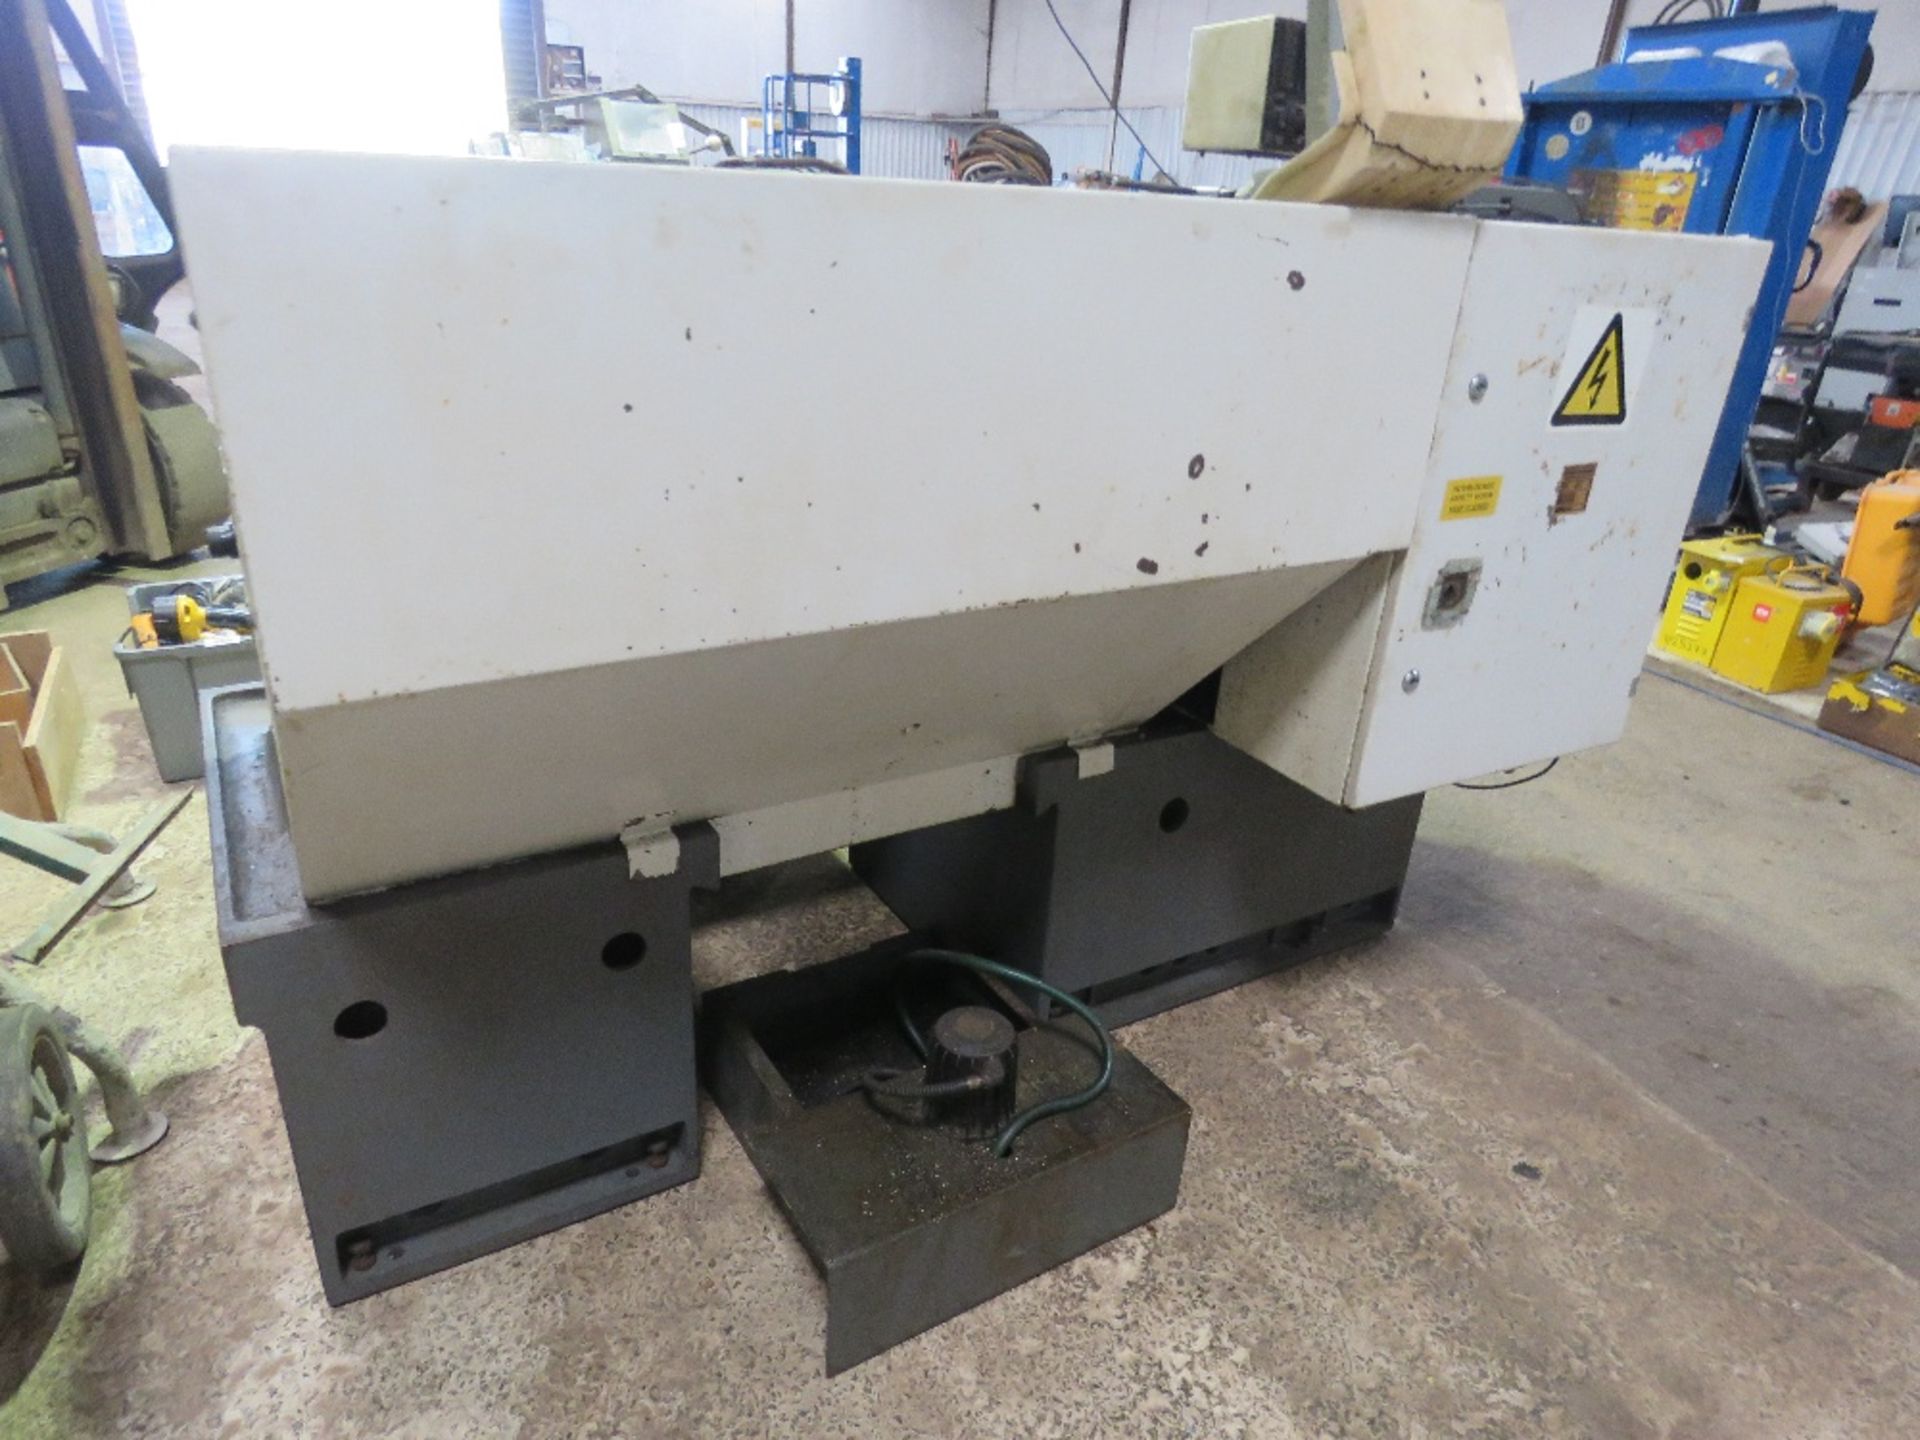 COLCHESTER TRIUMPH 2500 METAL WORKING LATHE, 3 PHASE POWERED. - Image 9 of 9